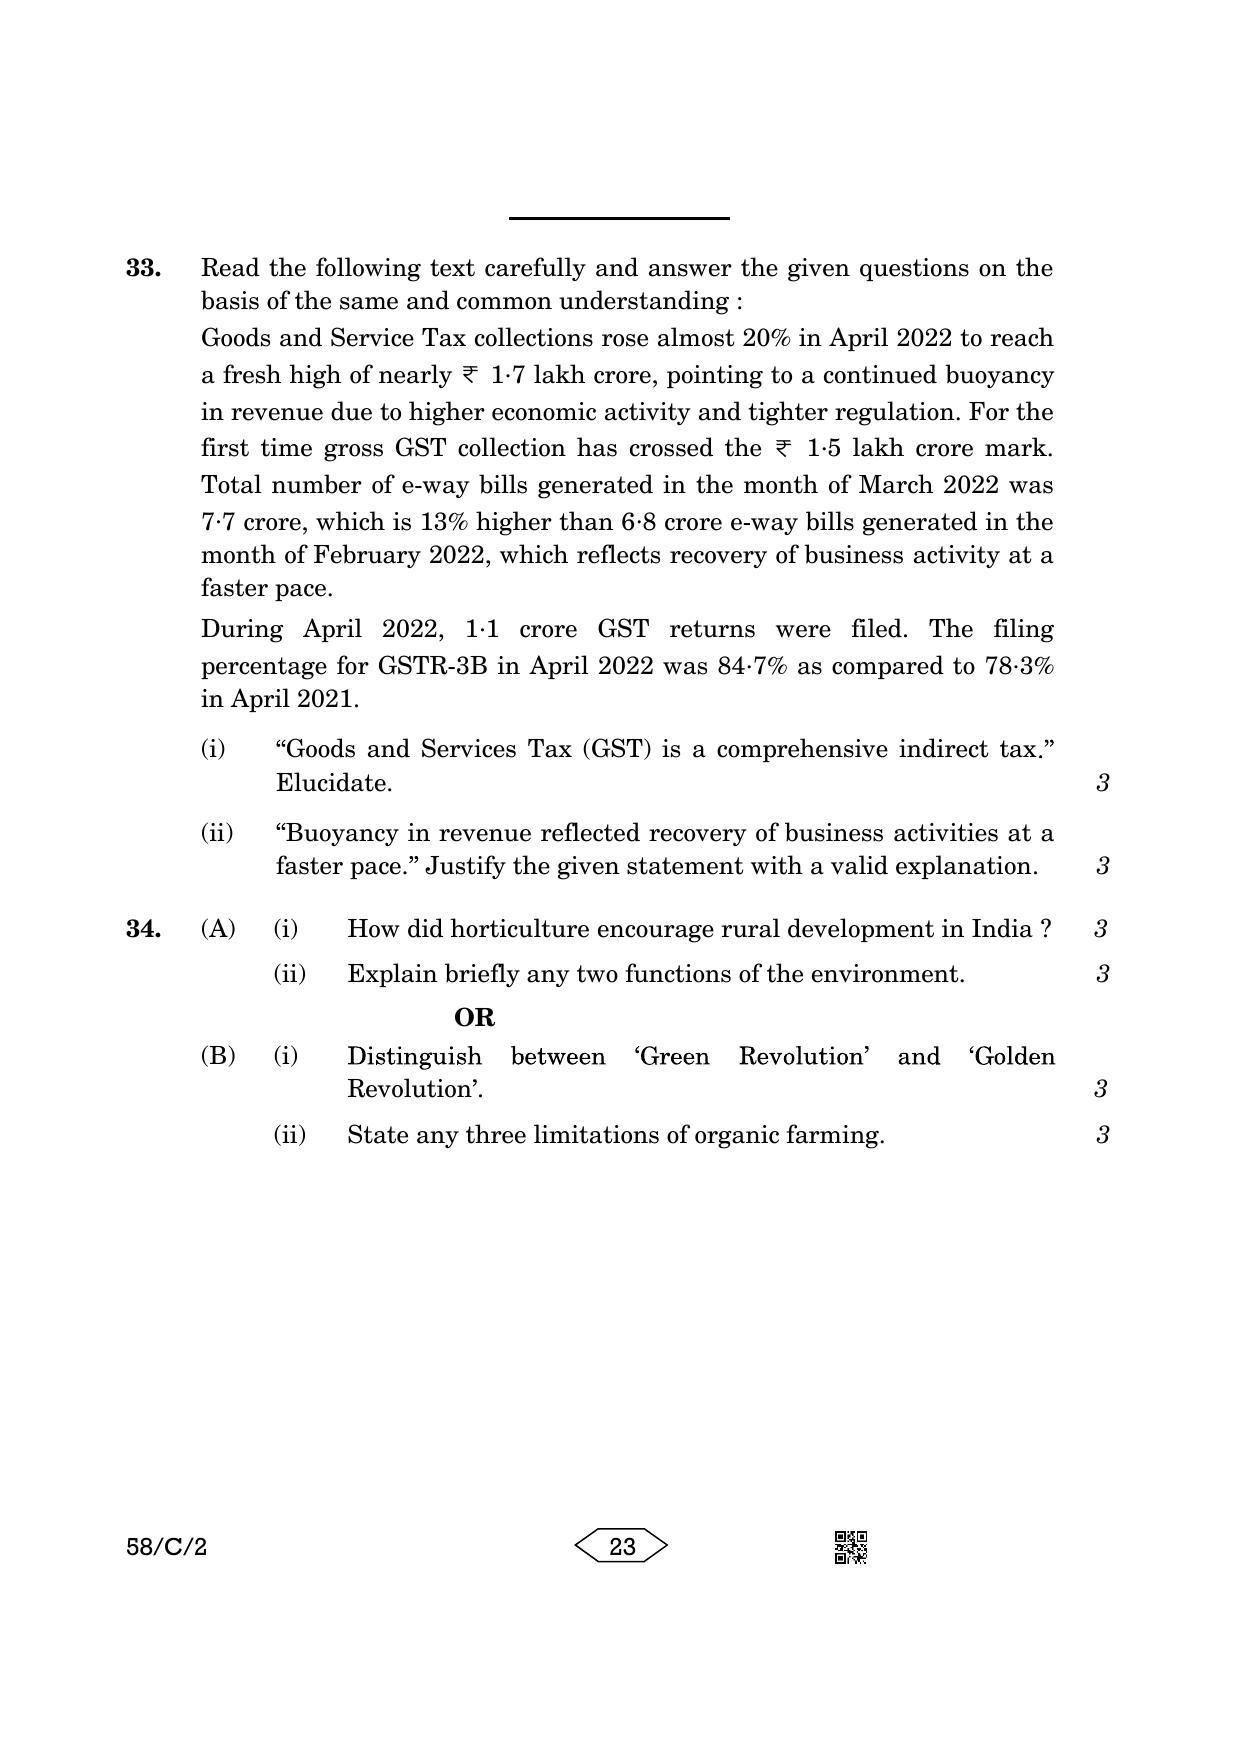 CBSE Class 12 58-2 Chemistry 2023 (Compartment) Question Paper - Page 23